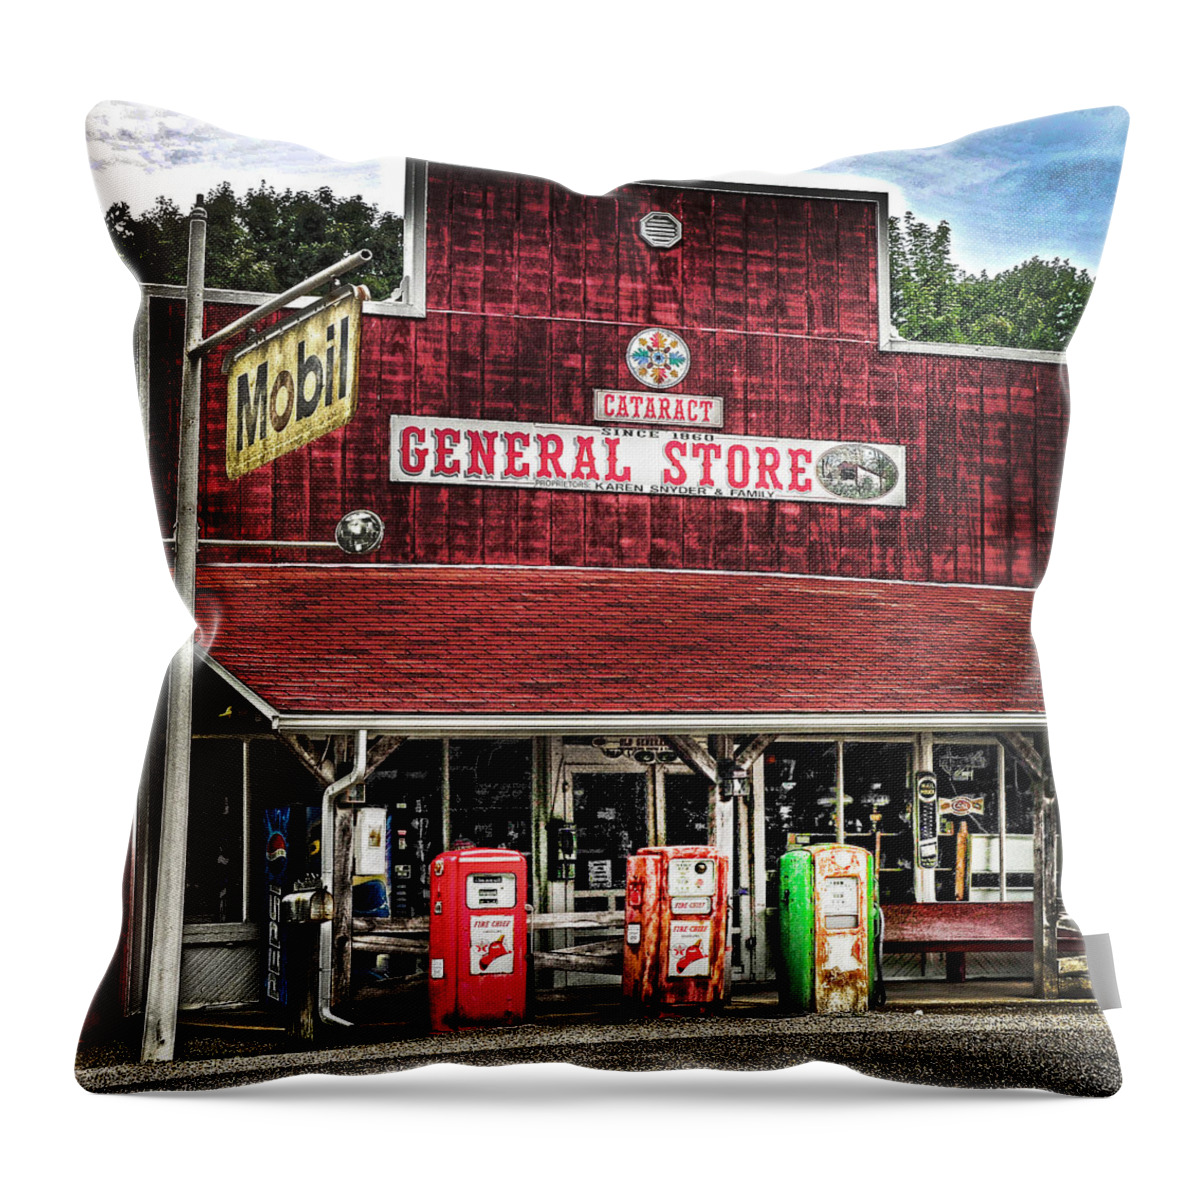 Built 1860 Throw Pillow featuring the photograph General Store Cataract In. by Randall Branham